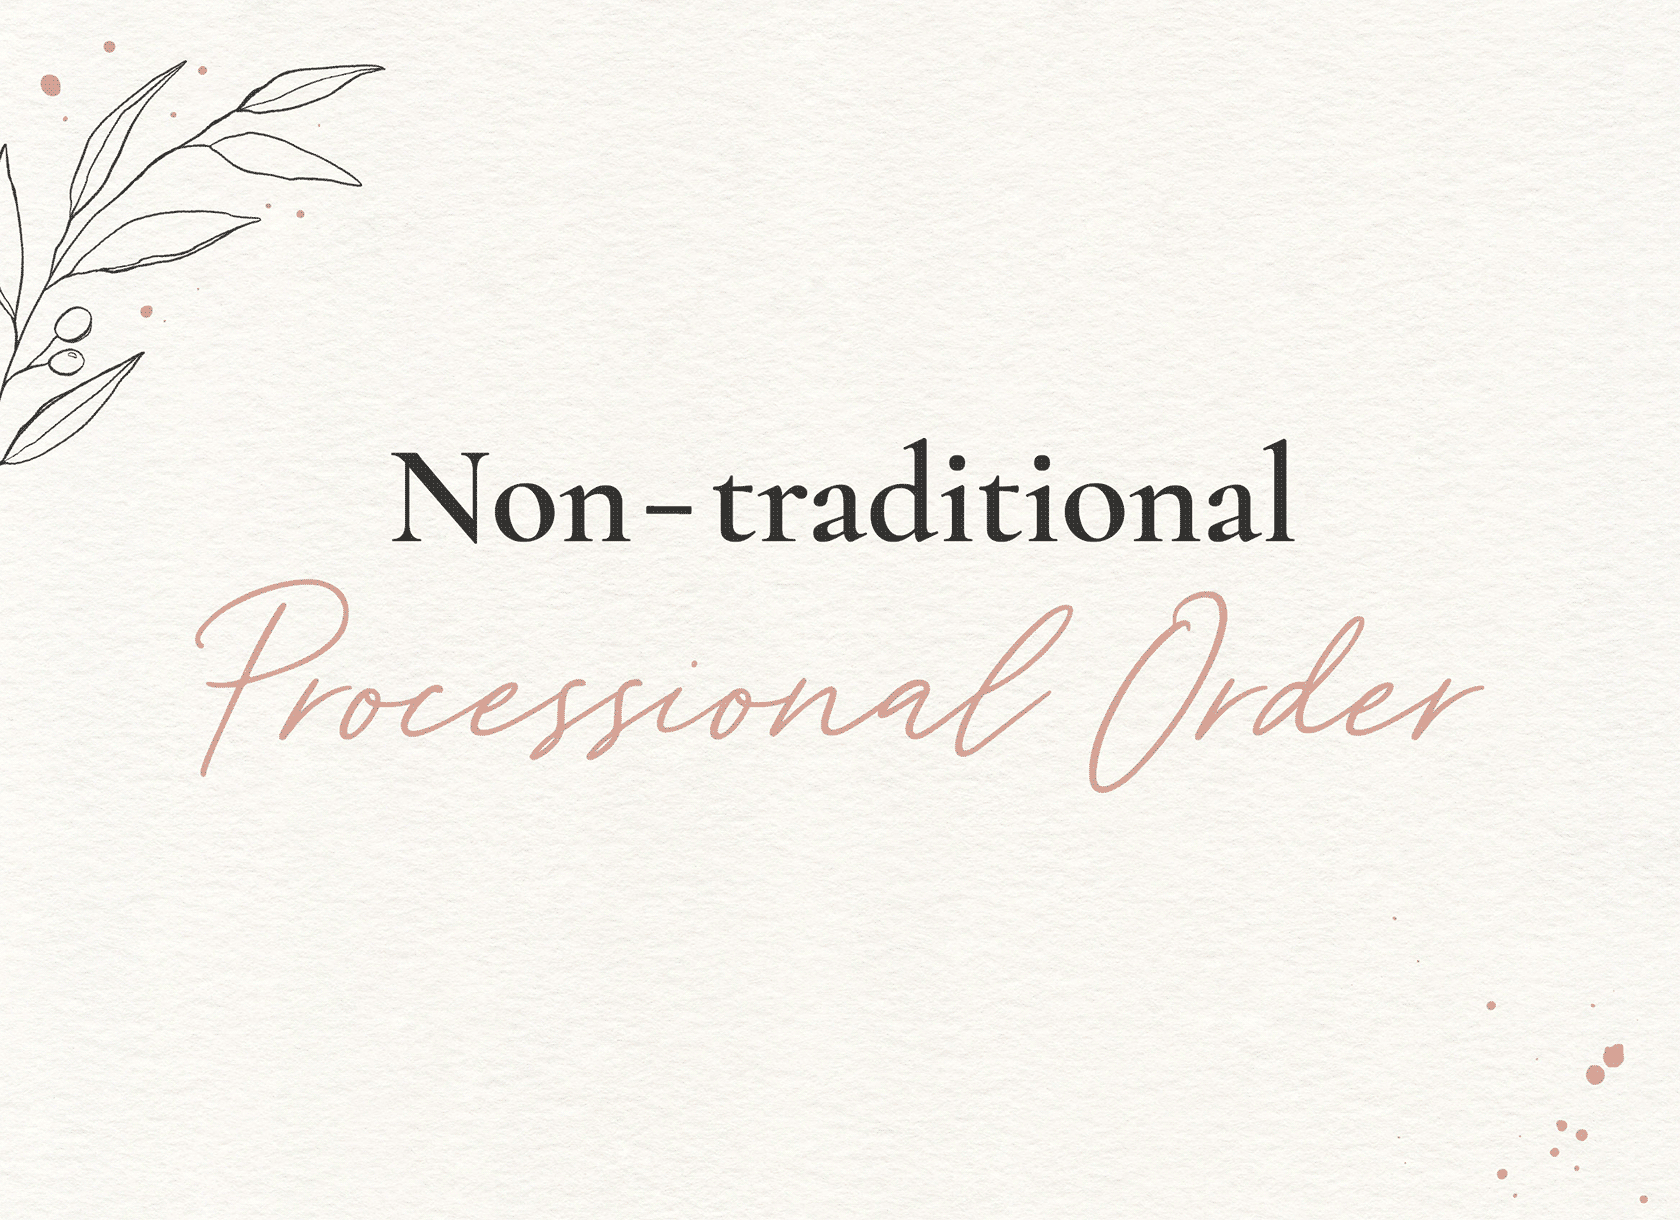 Non-traditional Processional Order